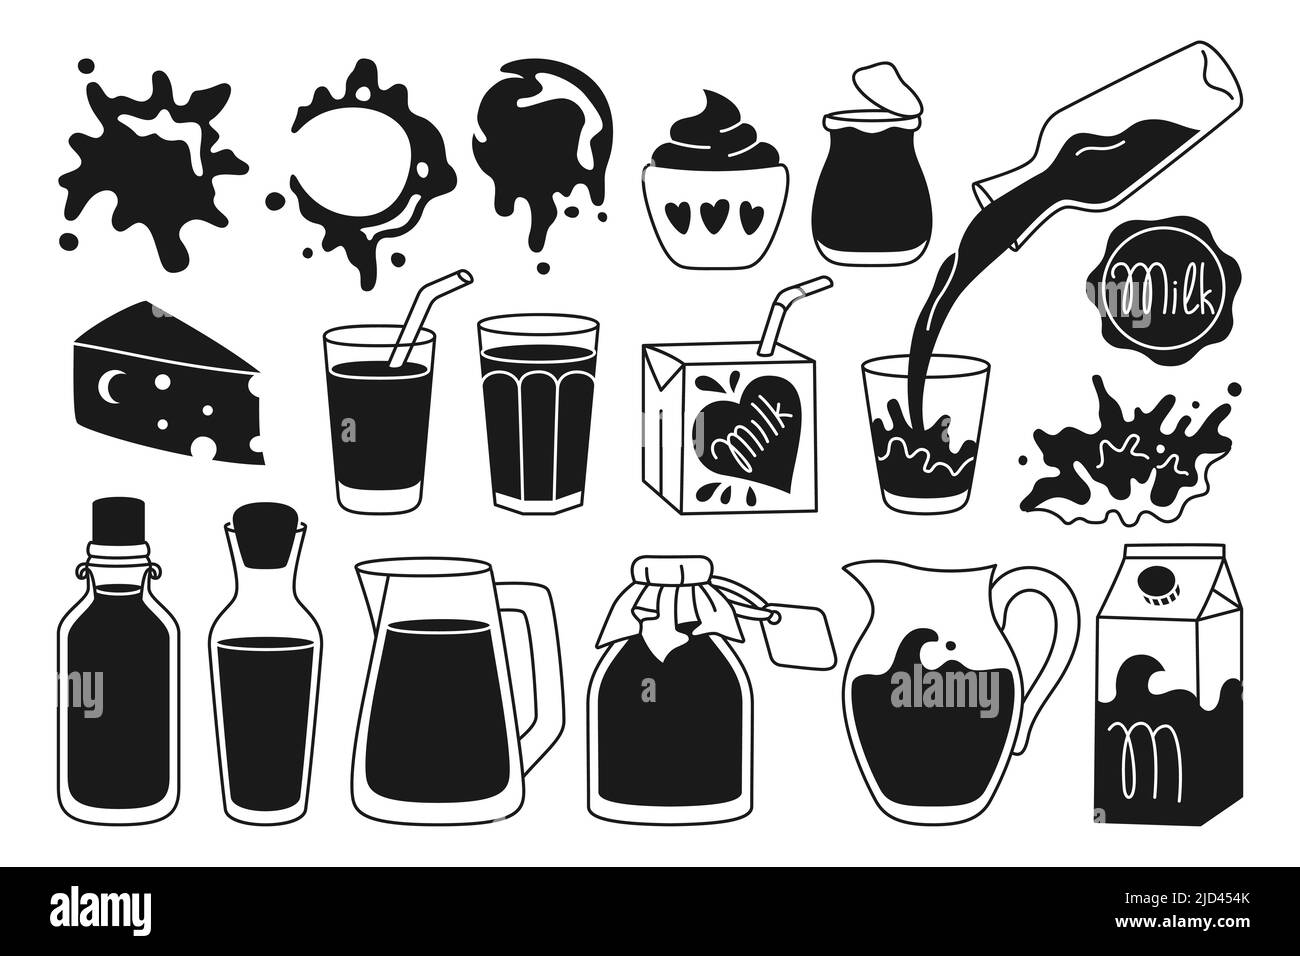 Milk food silhouette set. Farm foodstuff cheese and yogurt, drink in glass, jug, bottle or carton package line design. White pouring milk splashes drops drip. Natural dairy products graphic element Stock Vector